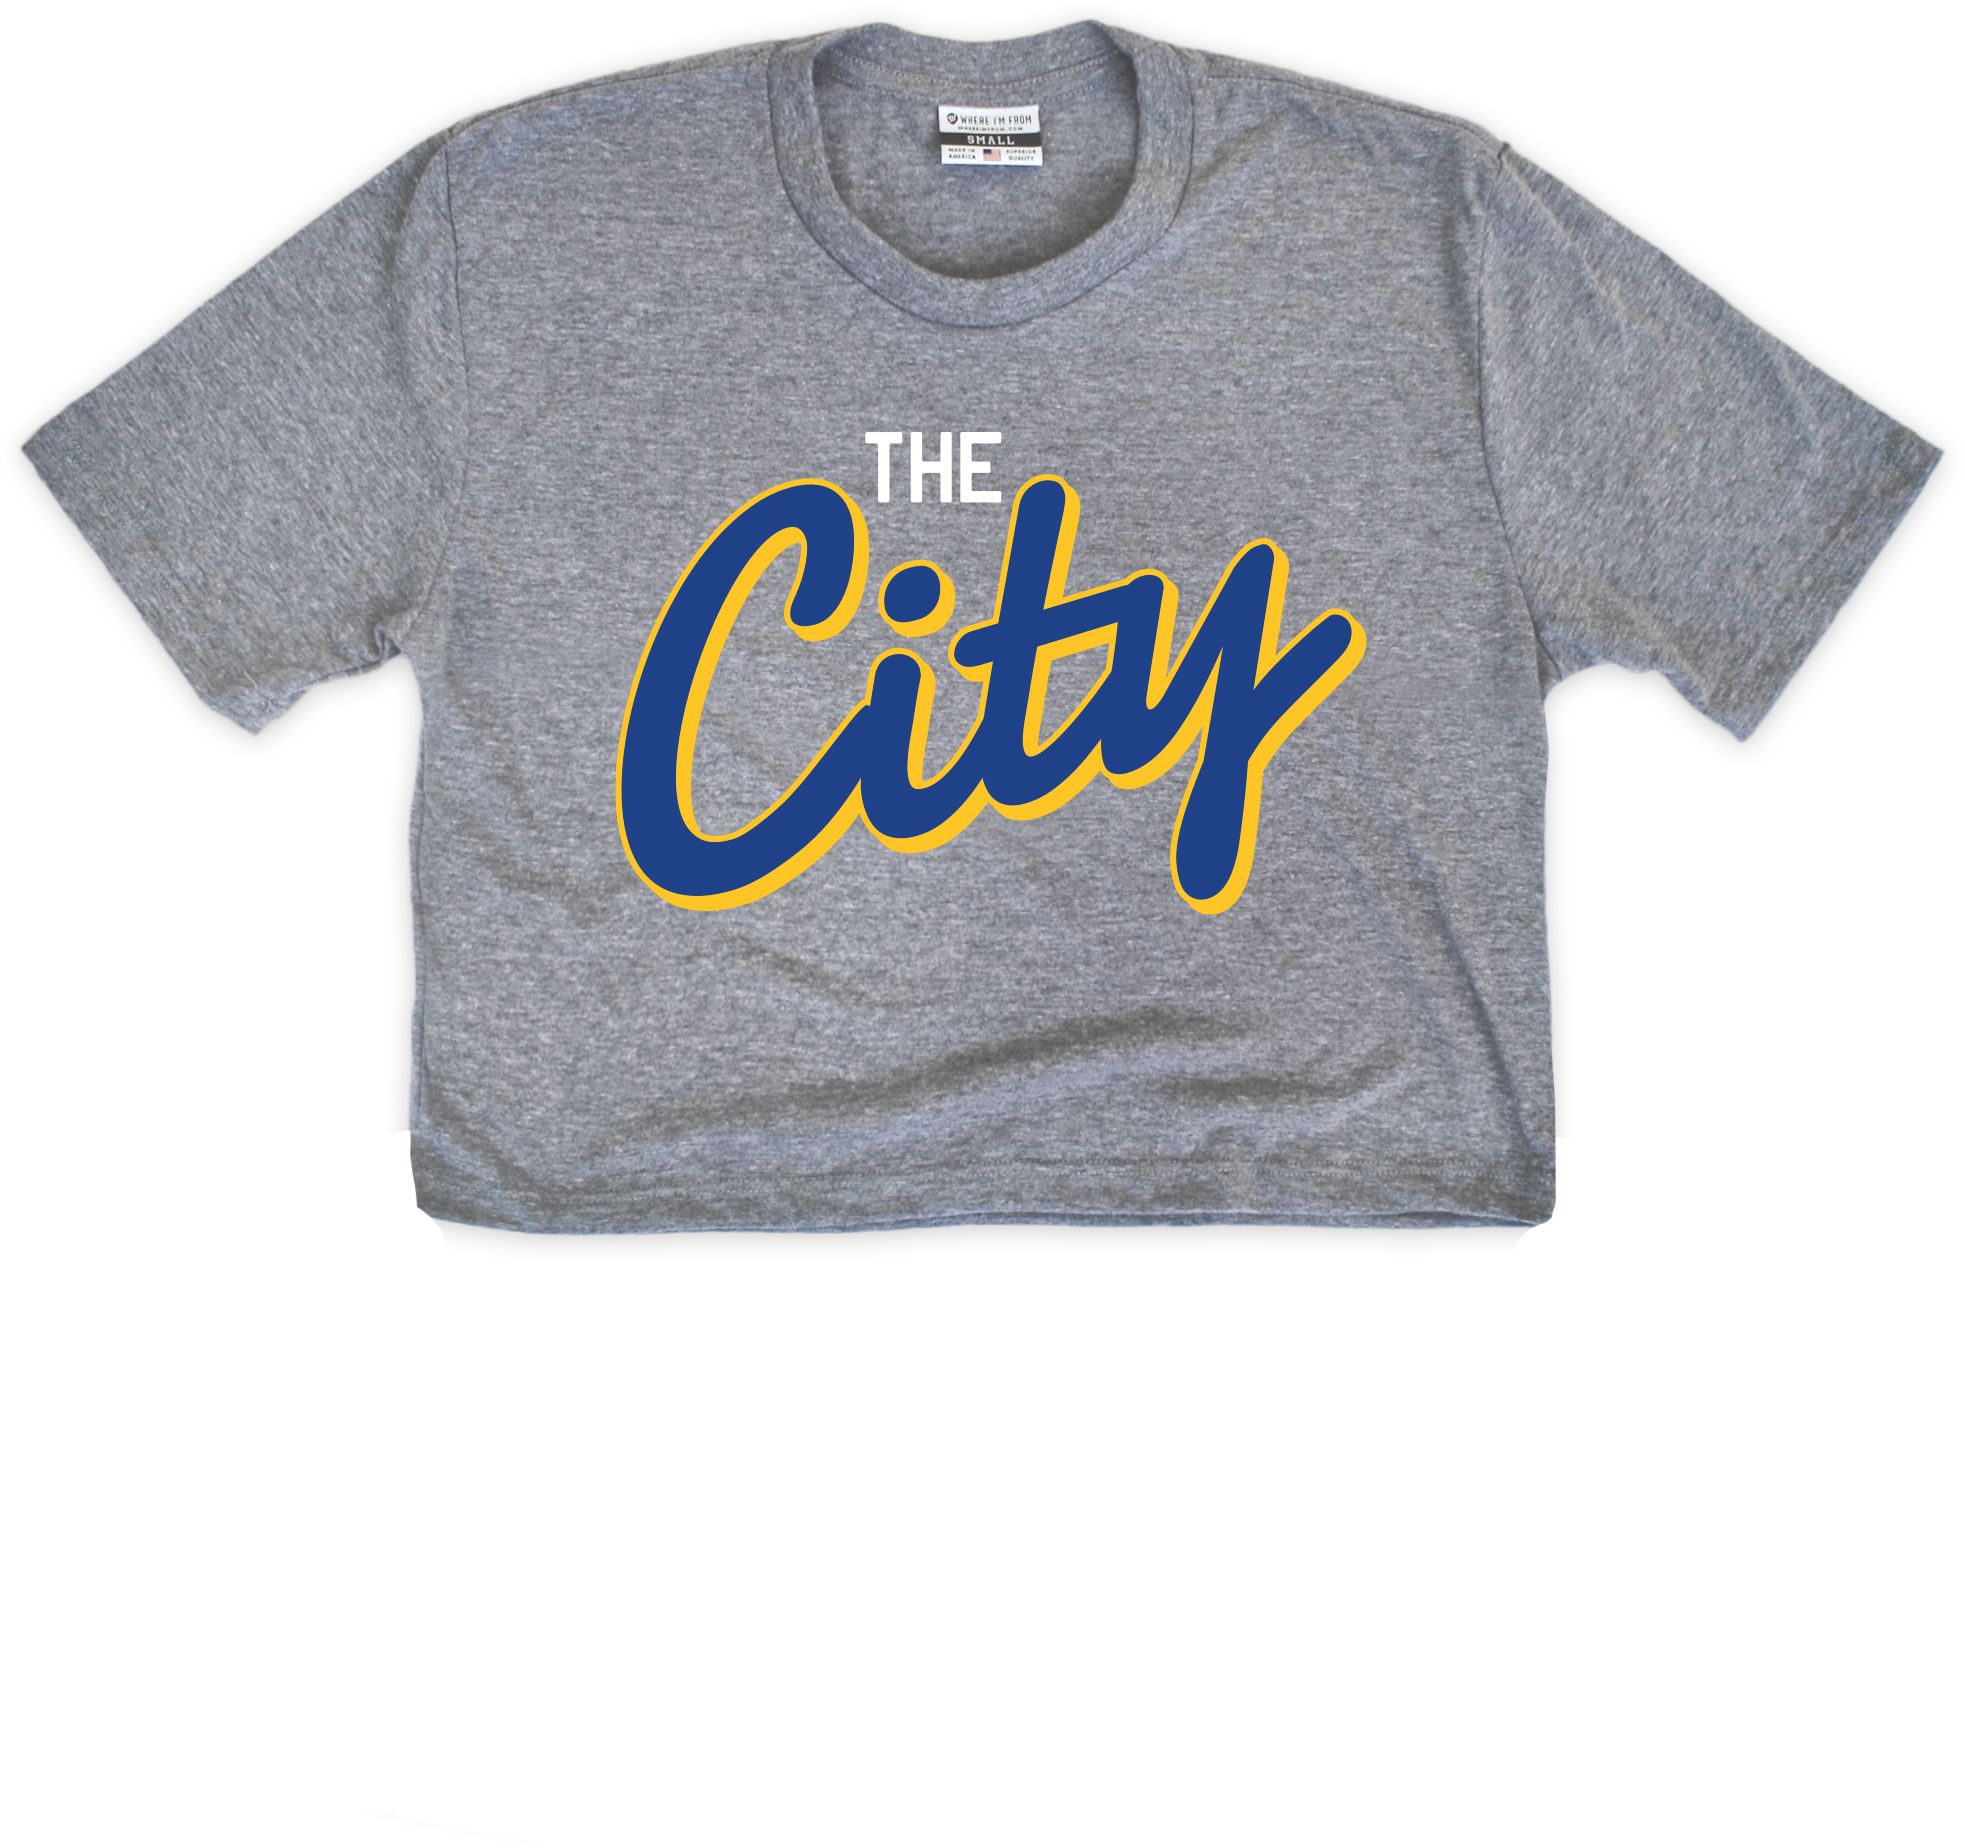 Where I'm From Women's Golden State City Script Cropped T-Shirt